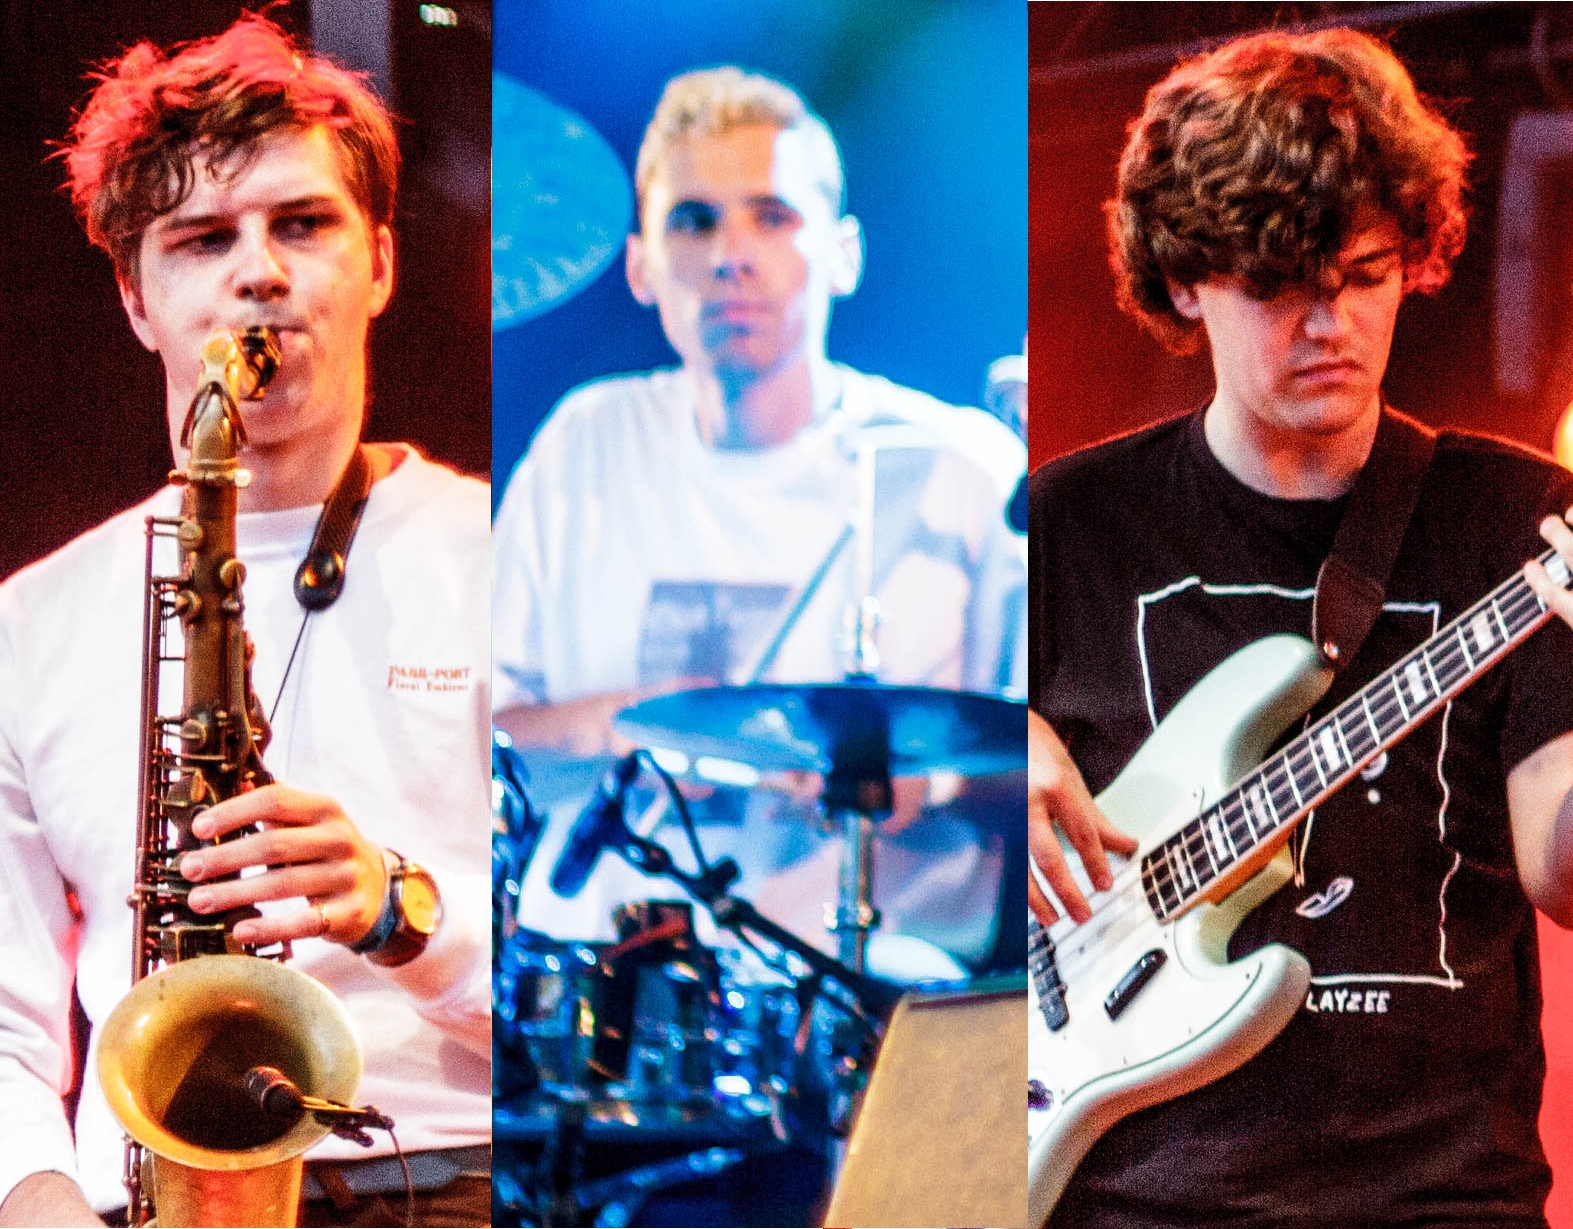 BADBADNOTGOOD: 5 Albums That Changed Our Lives